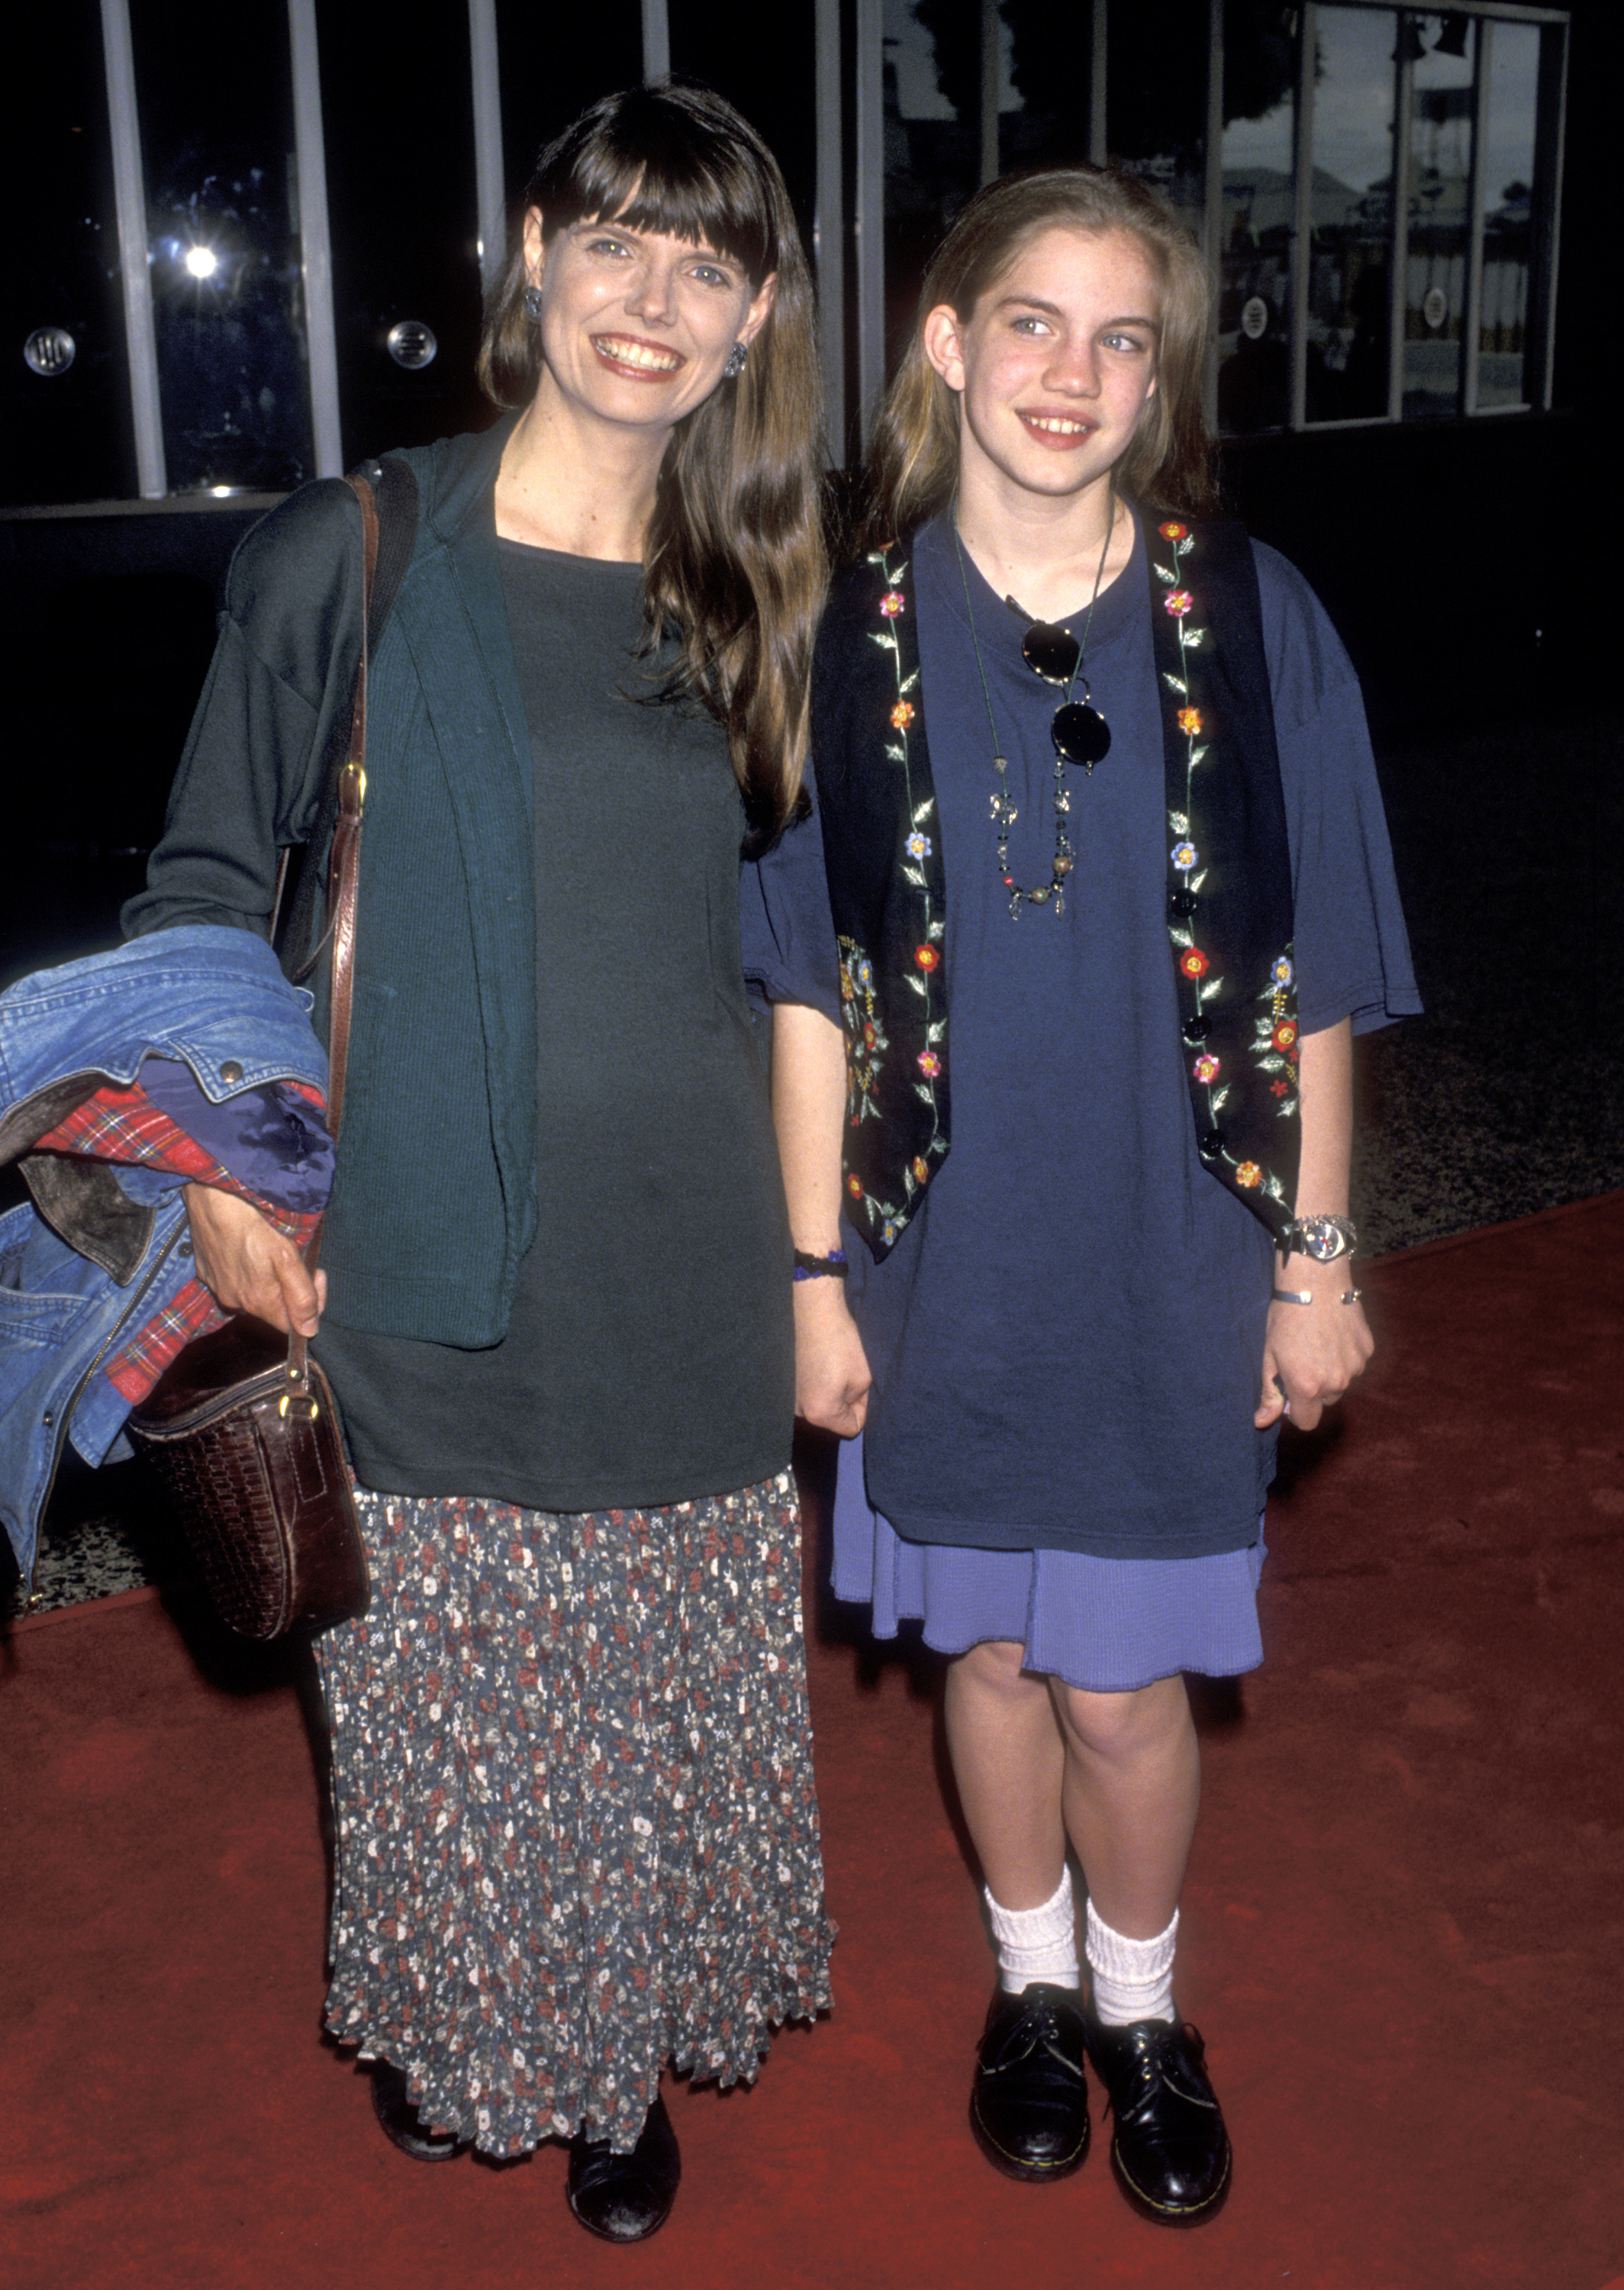 Nancy and Anna Chlumsky at the Seventh Annual Nickelodeon's Kids' Choice Awards on May 7, 1994, in Hollywood, California | Source: Getty Images